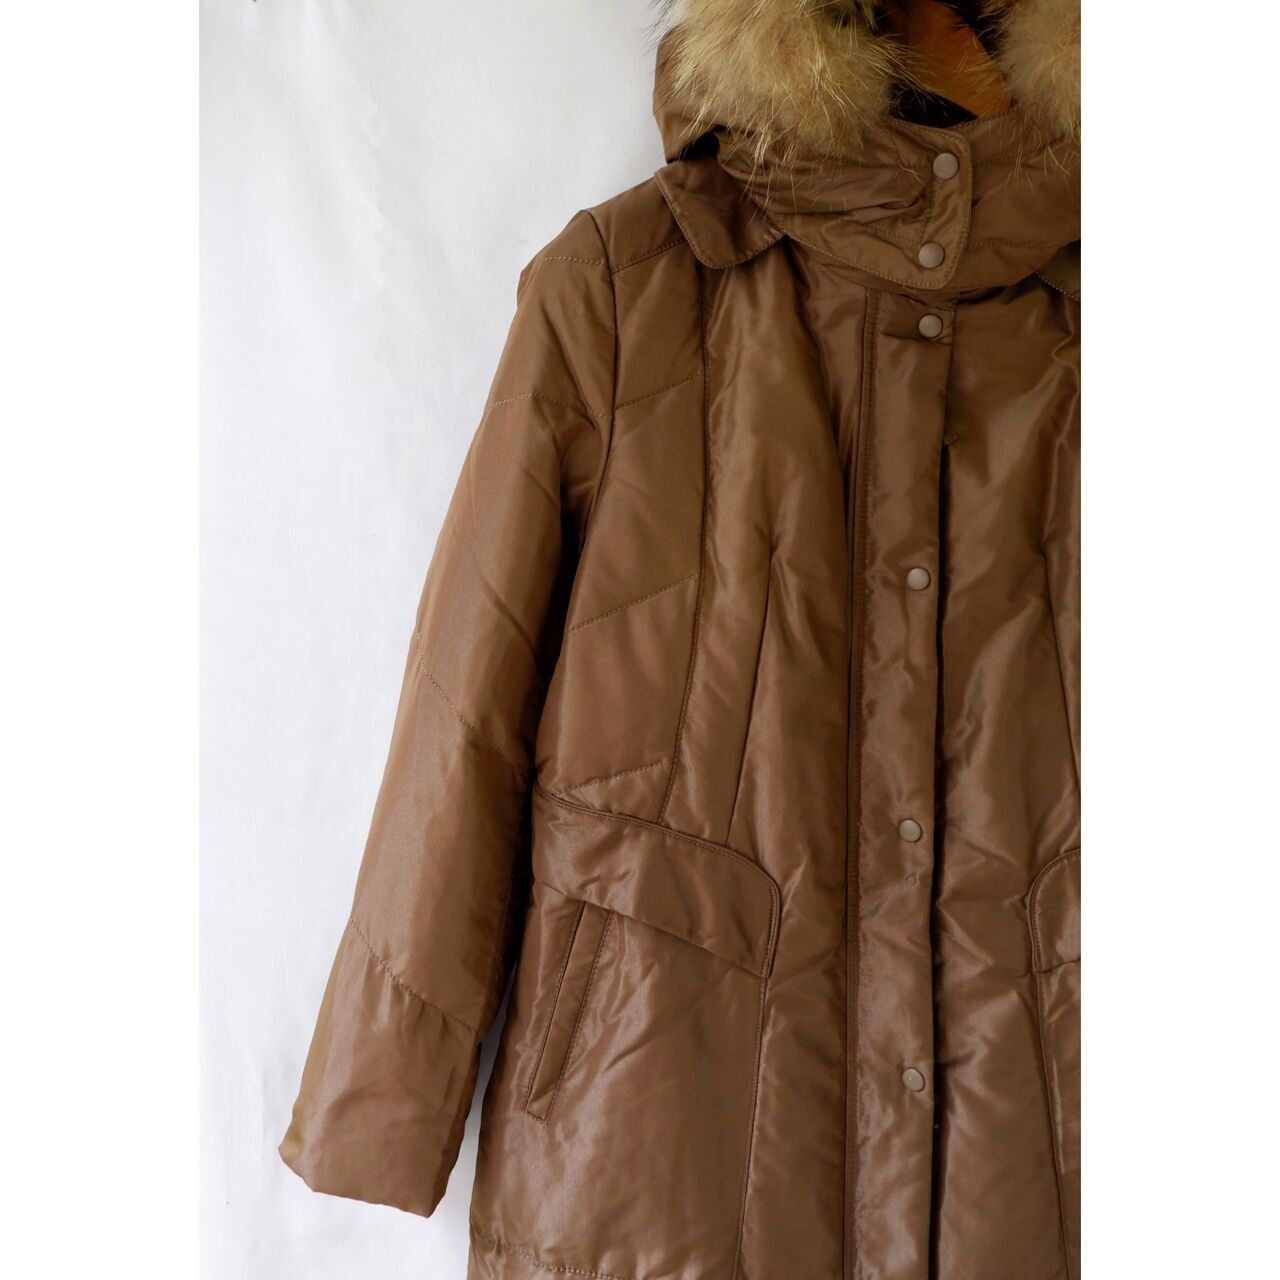 Bcbg Timeless Tradition Brown Geometric Puffy Coat